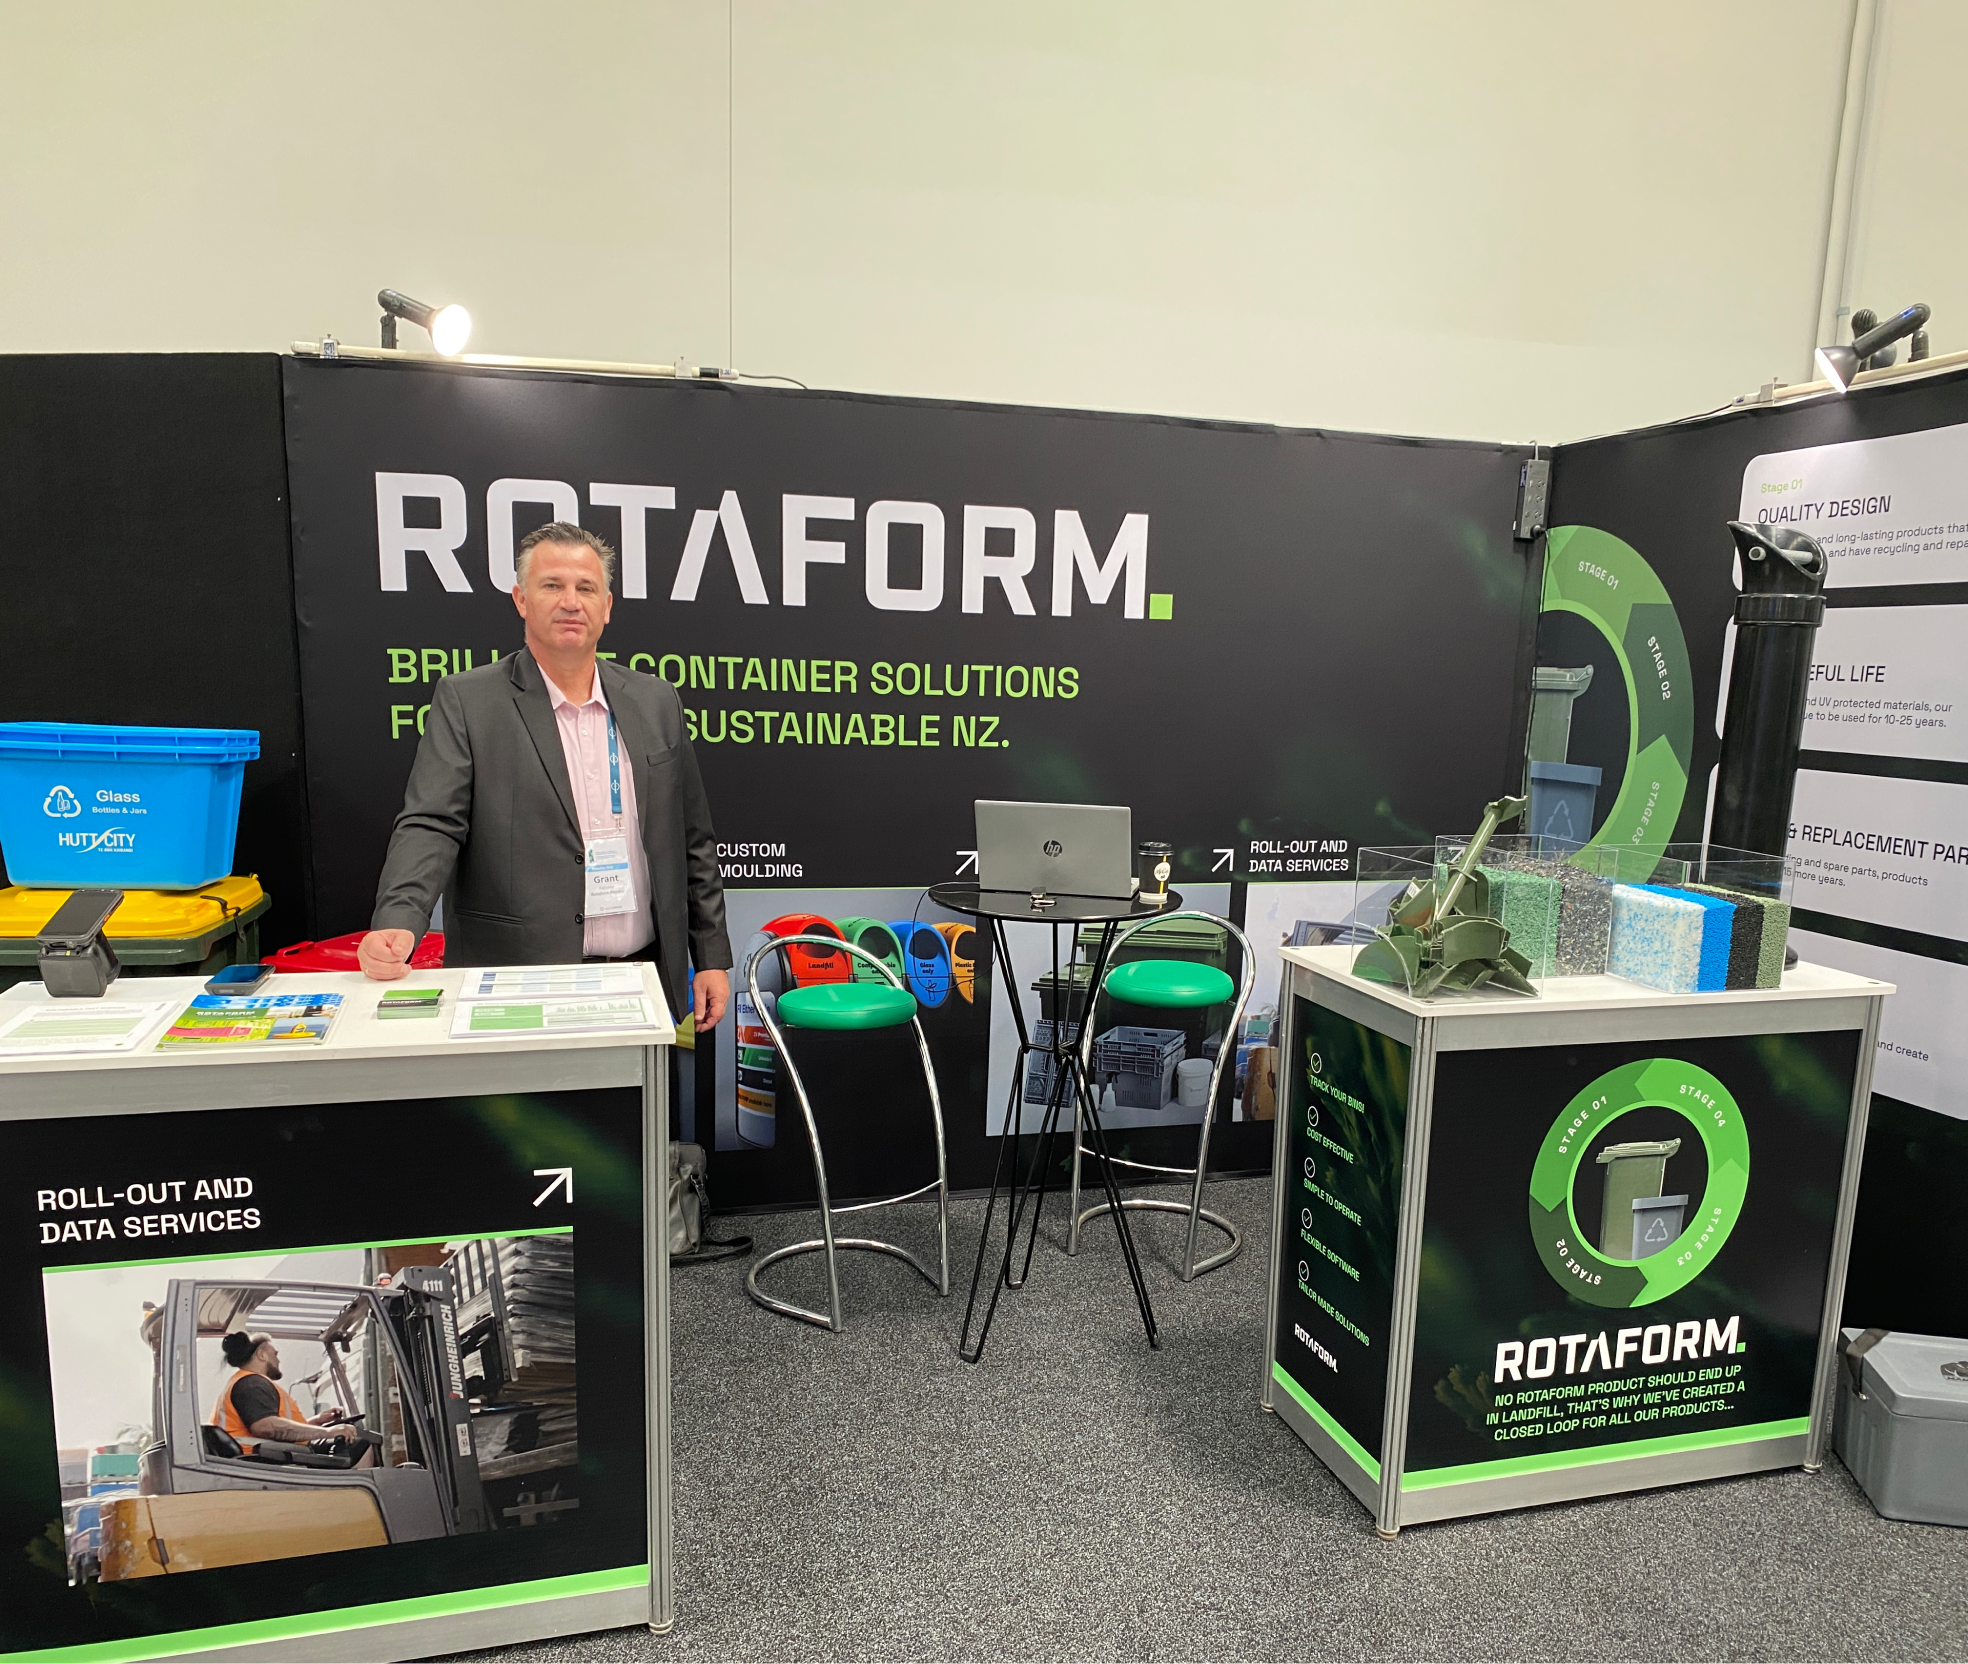 Rotaform Live From The Wasteminz Conference Hamilton